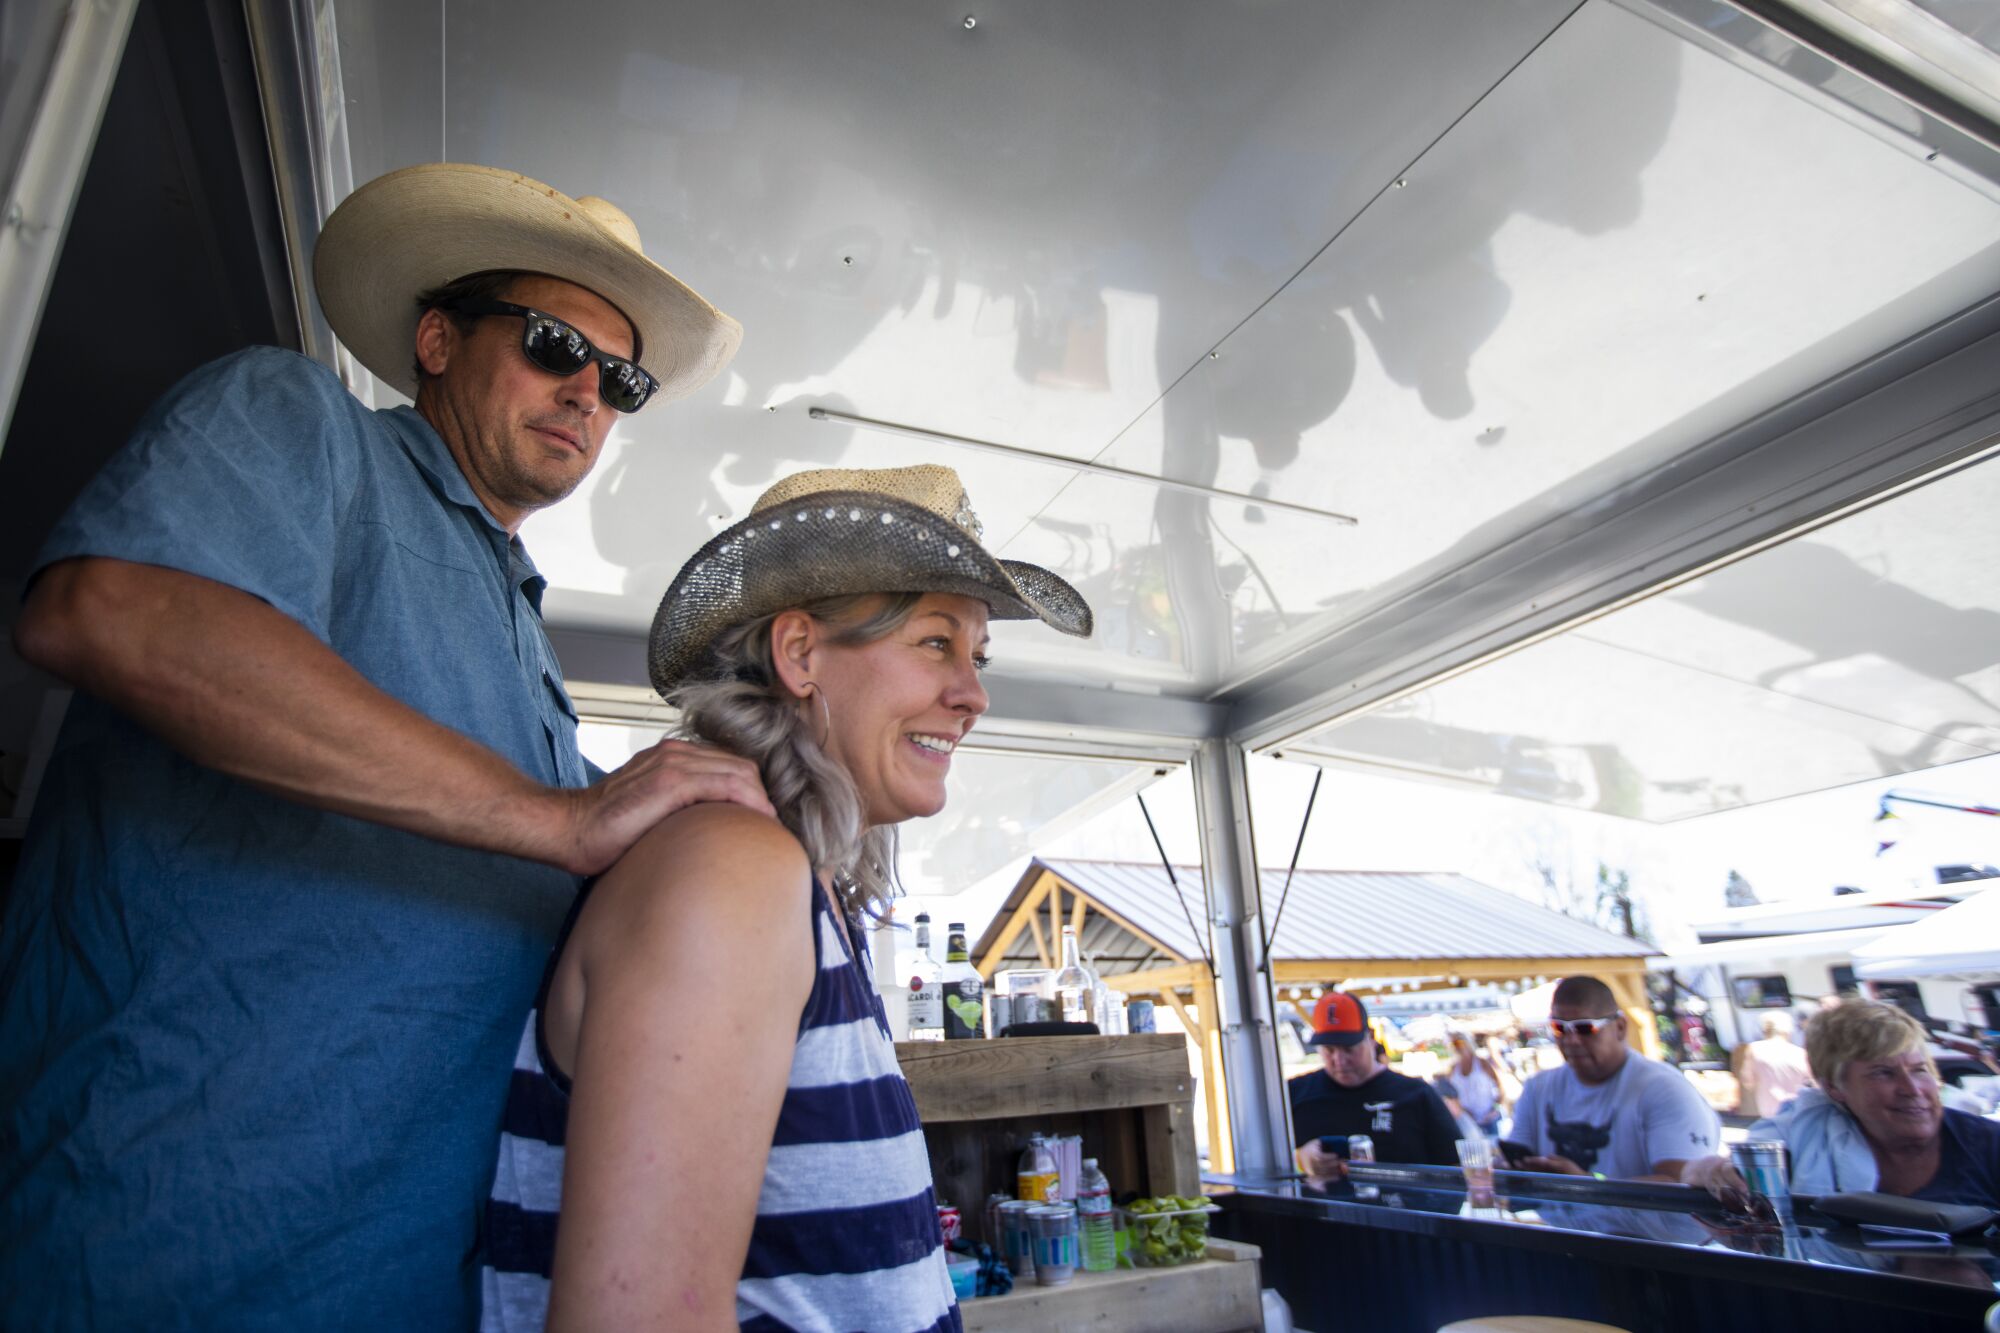 Kevin Goss, left, and his girlfriend Kira, right, operate a mobile bar during the Gold Digger Days celebration